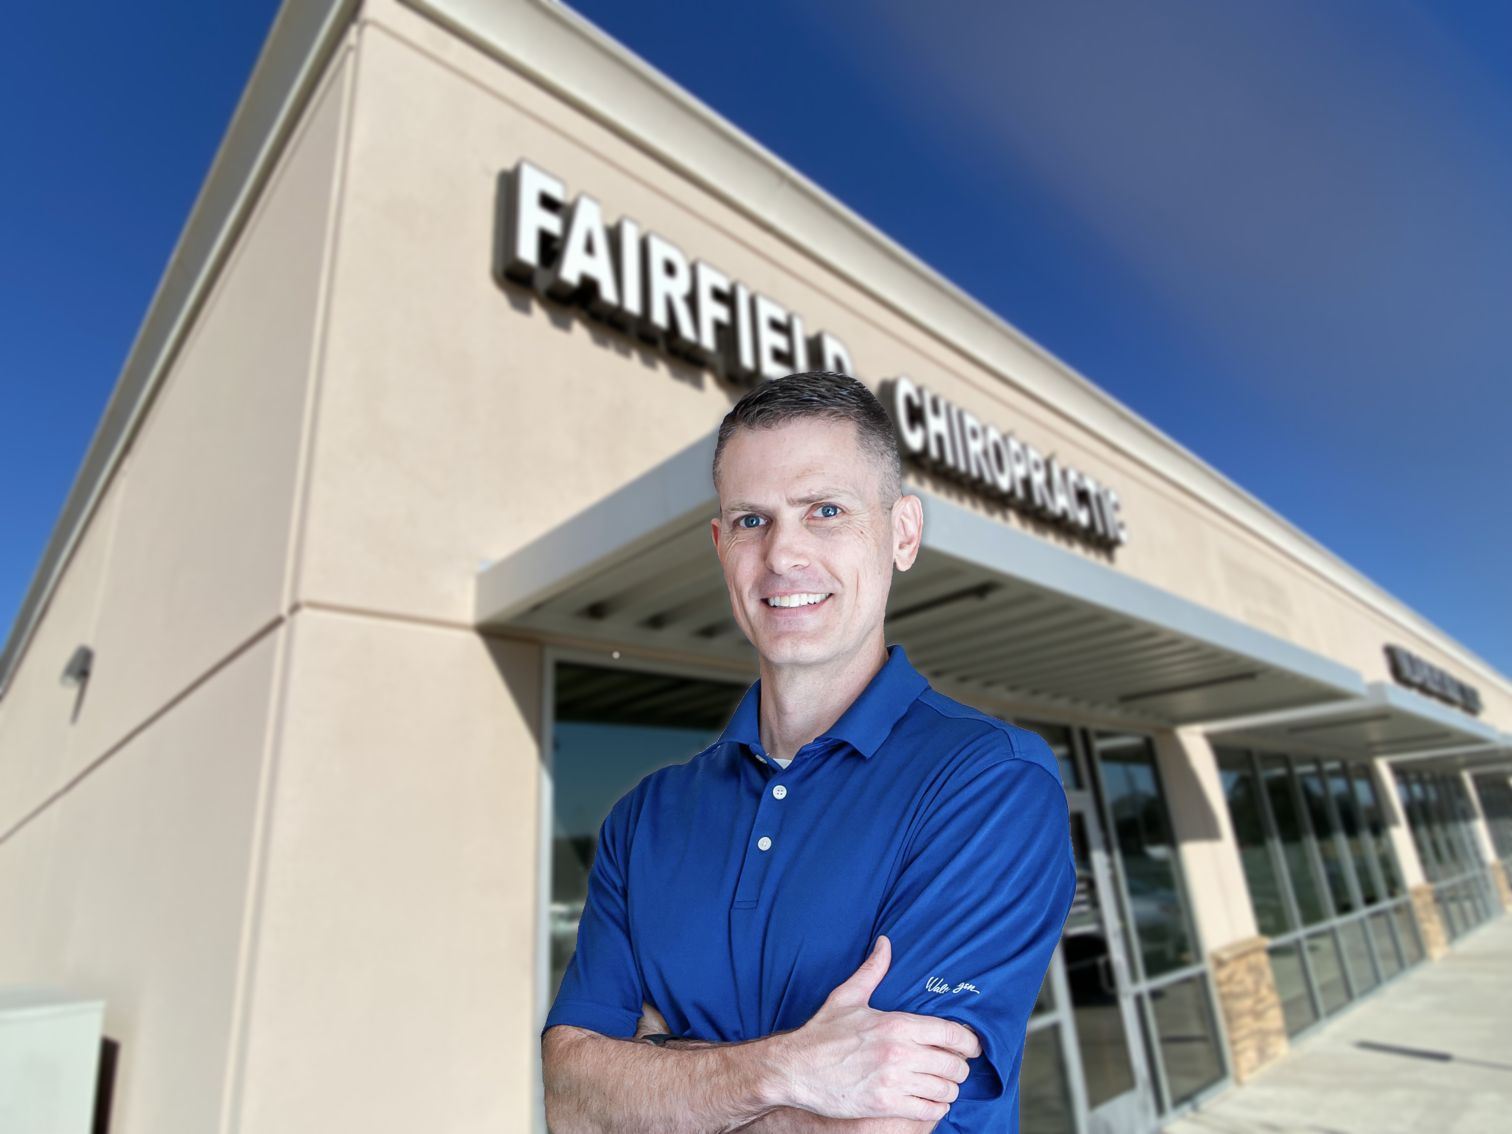 Dr. Paul Willmon stands in front of his chiropractic business